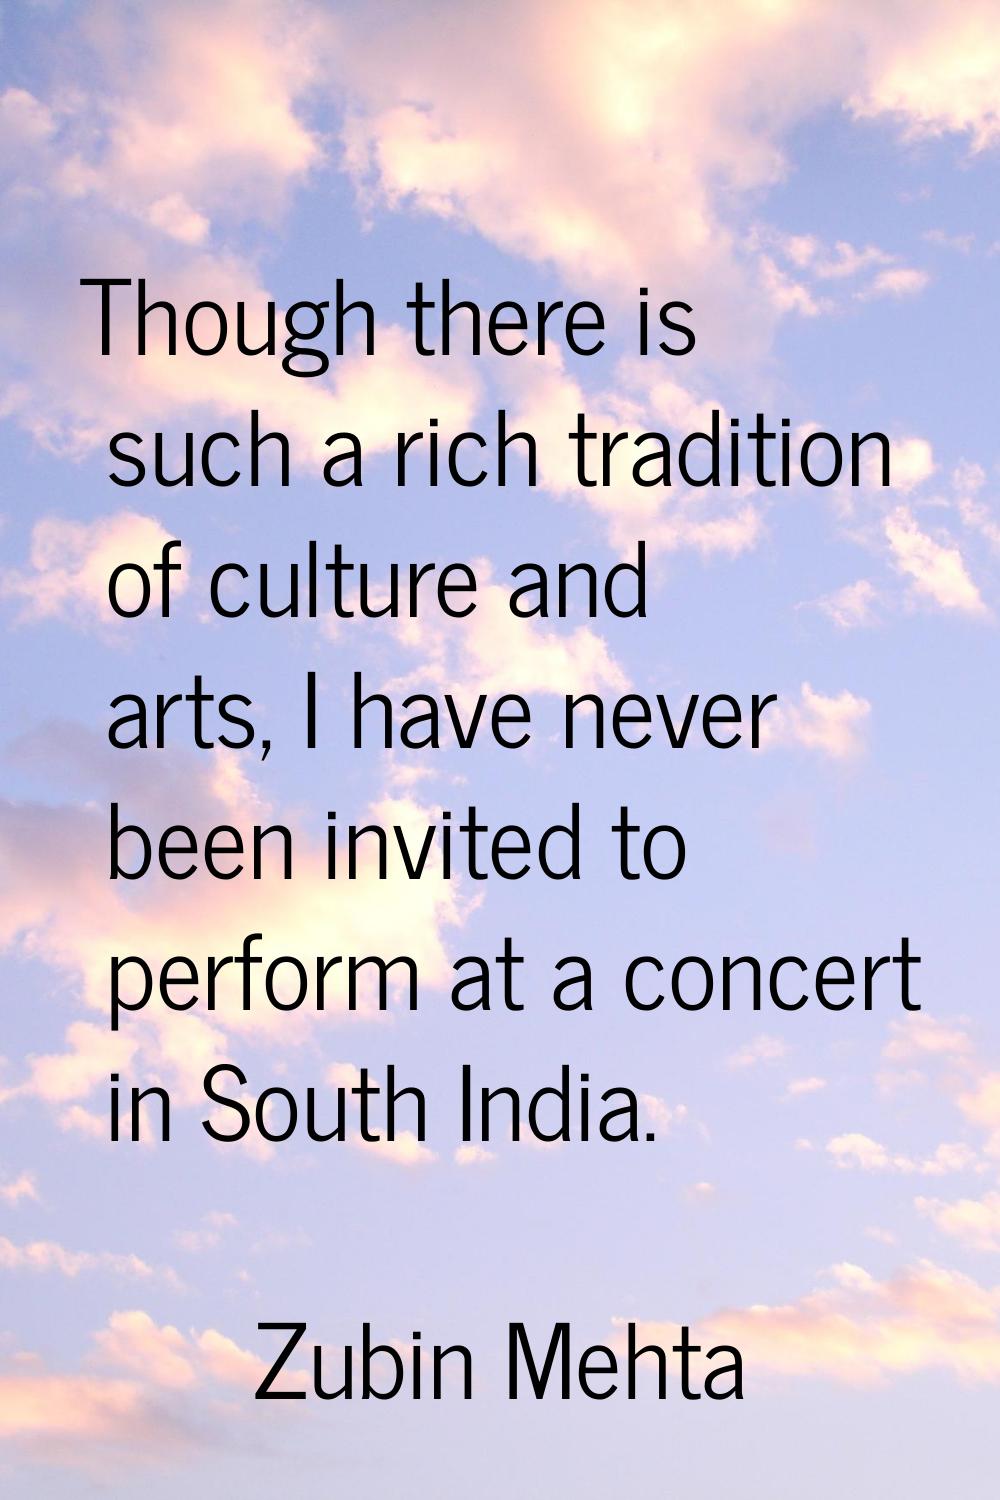 Though there is such a rich tradition of culture and arts, I have never been invited to perform at 